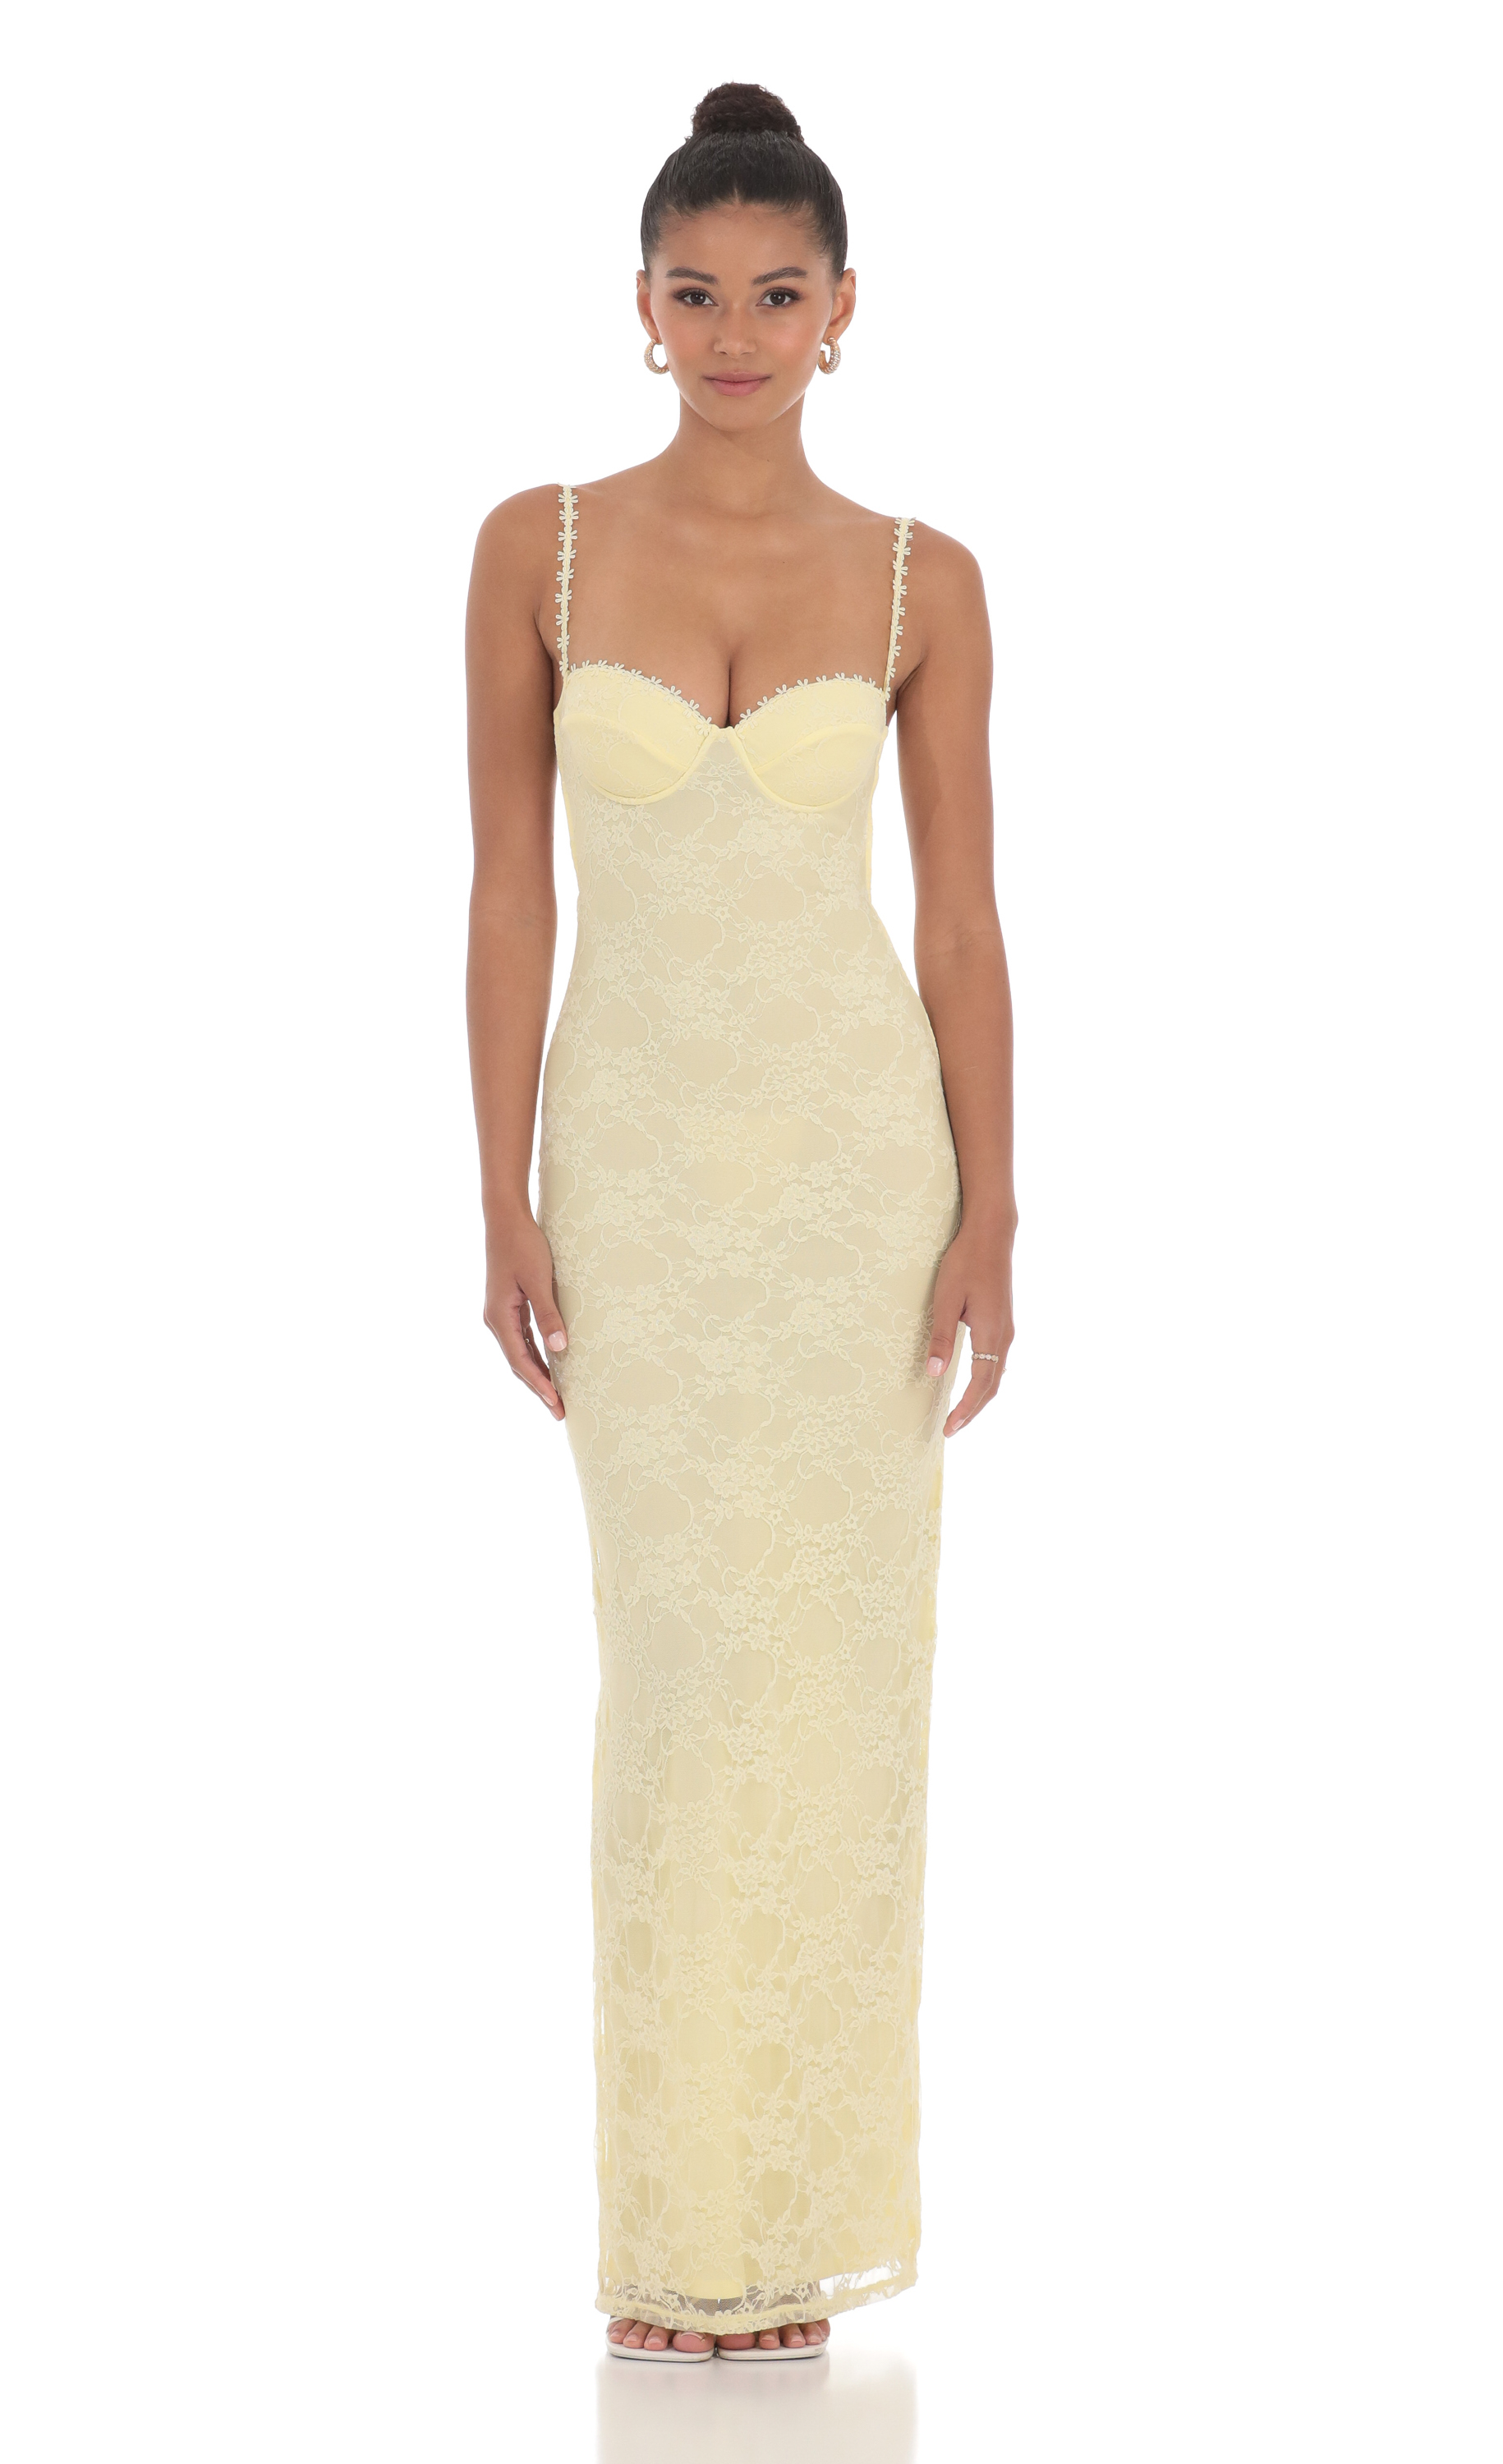 Lace Floral Trim Maxi Dress in Yellow